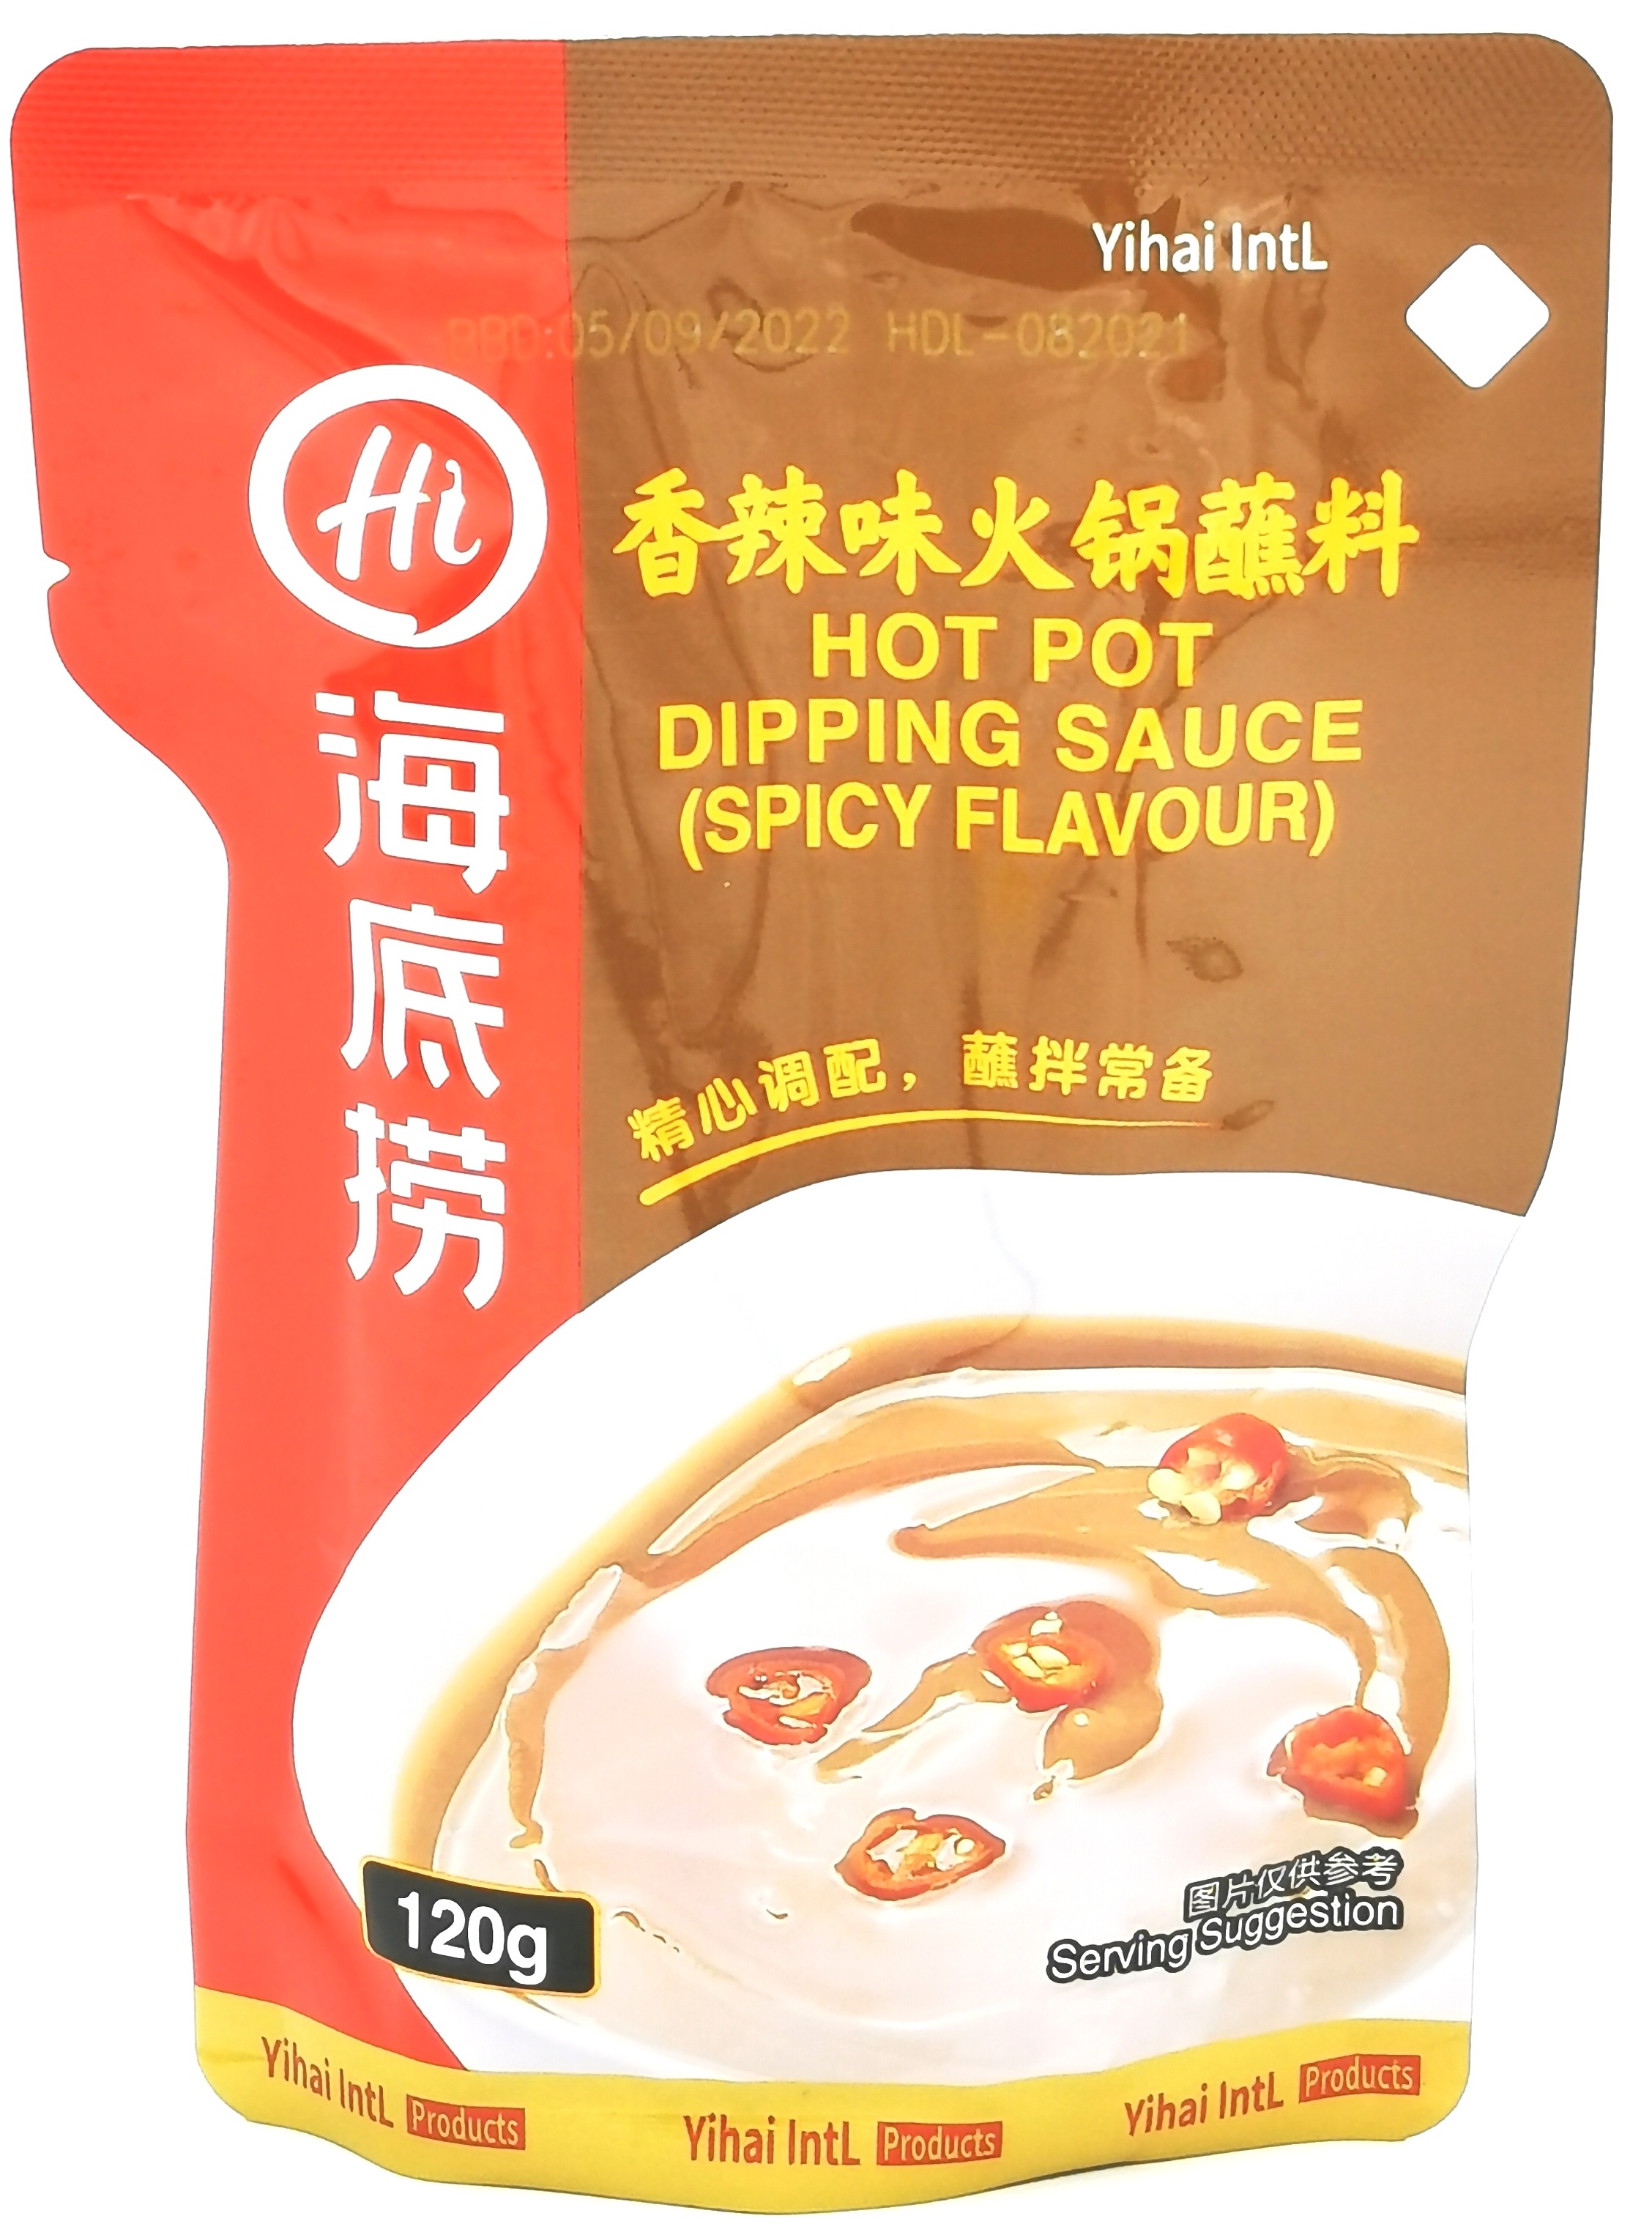 Spicy flavour hot pot dipping sauce 120g